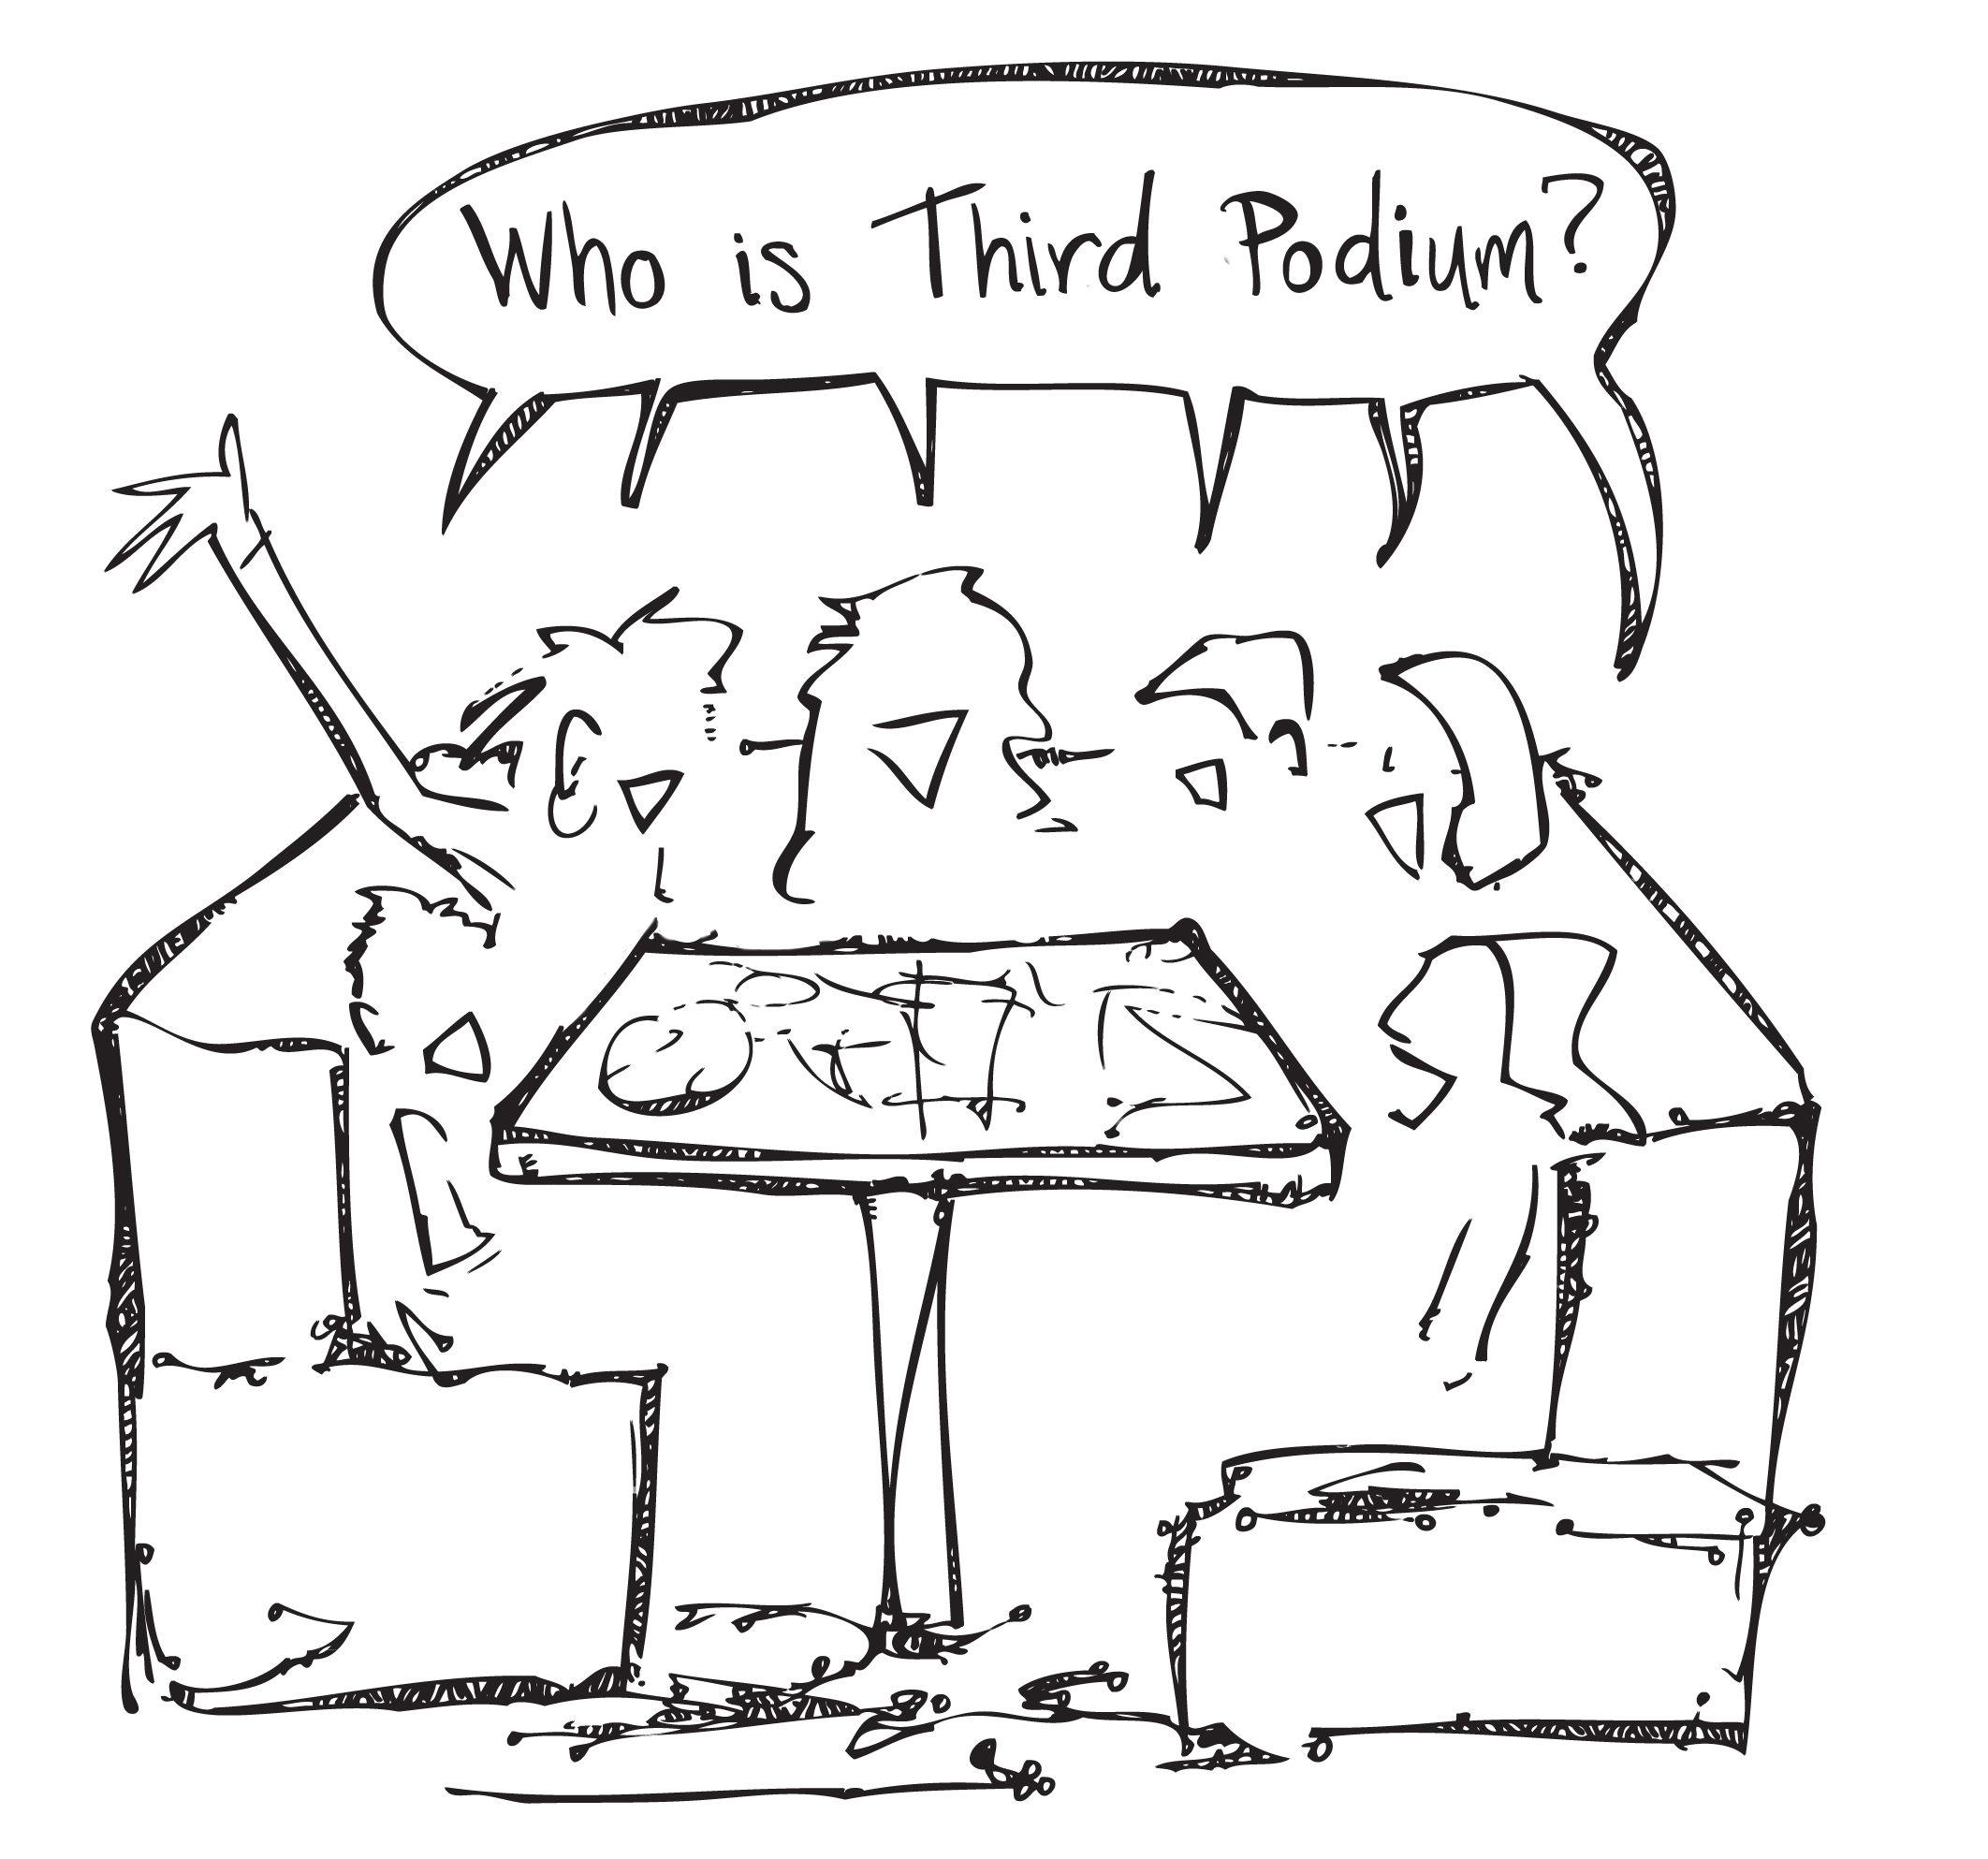 drawing of six women sit around a table shouting 'Who is Third Podium?'